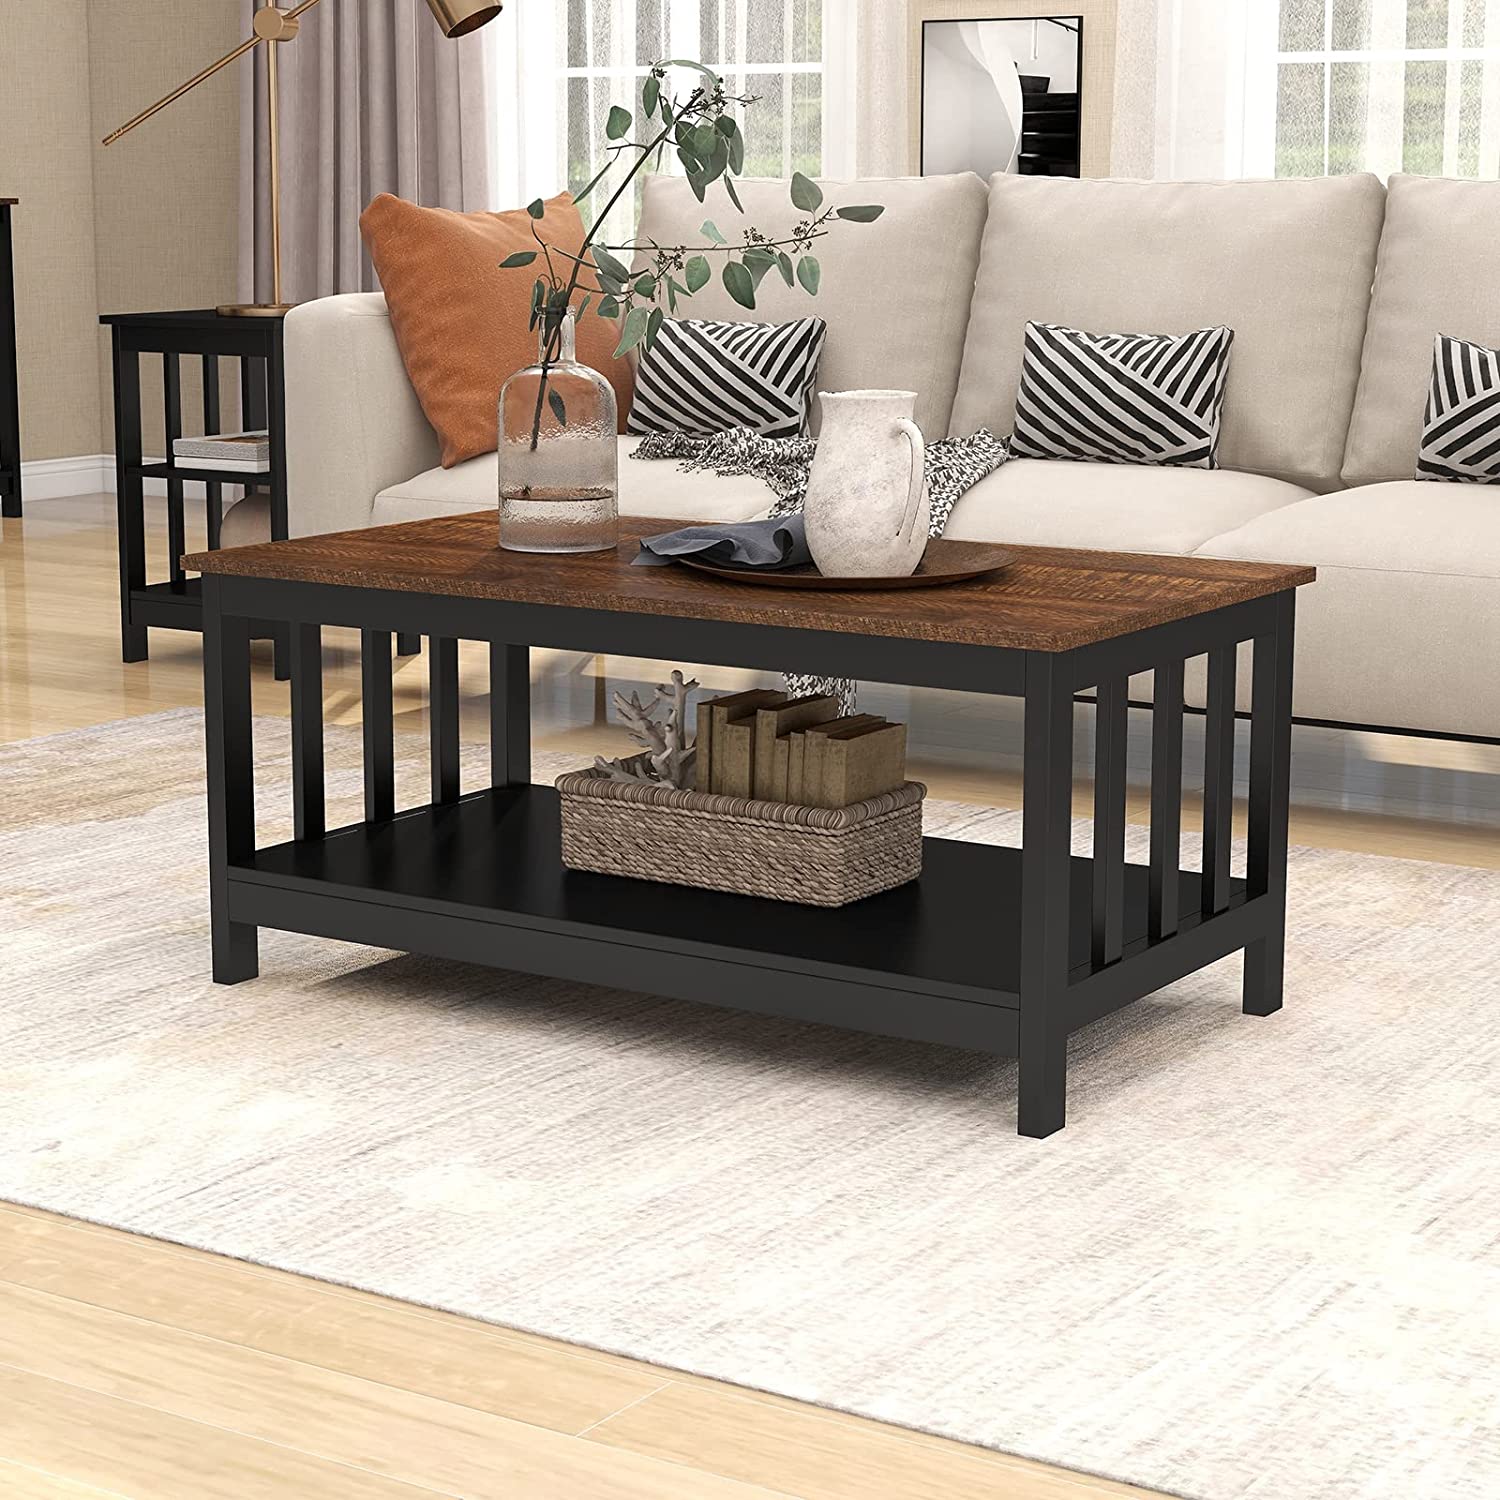 Wooden Coffee Table Living Room Table with Shelf,